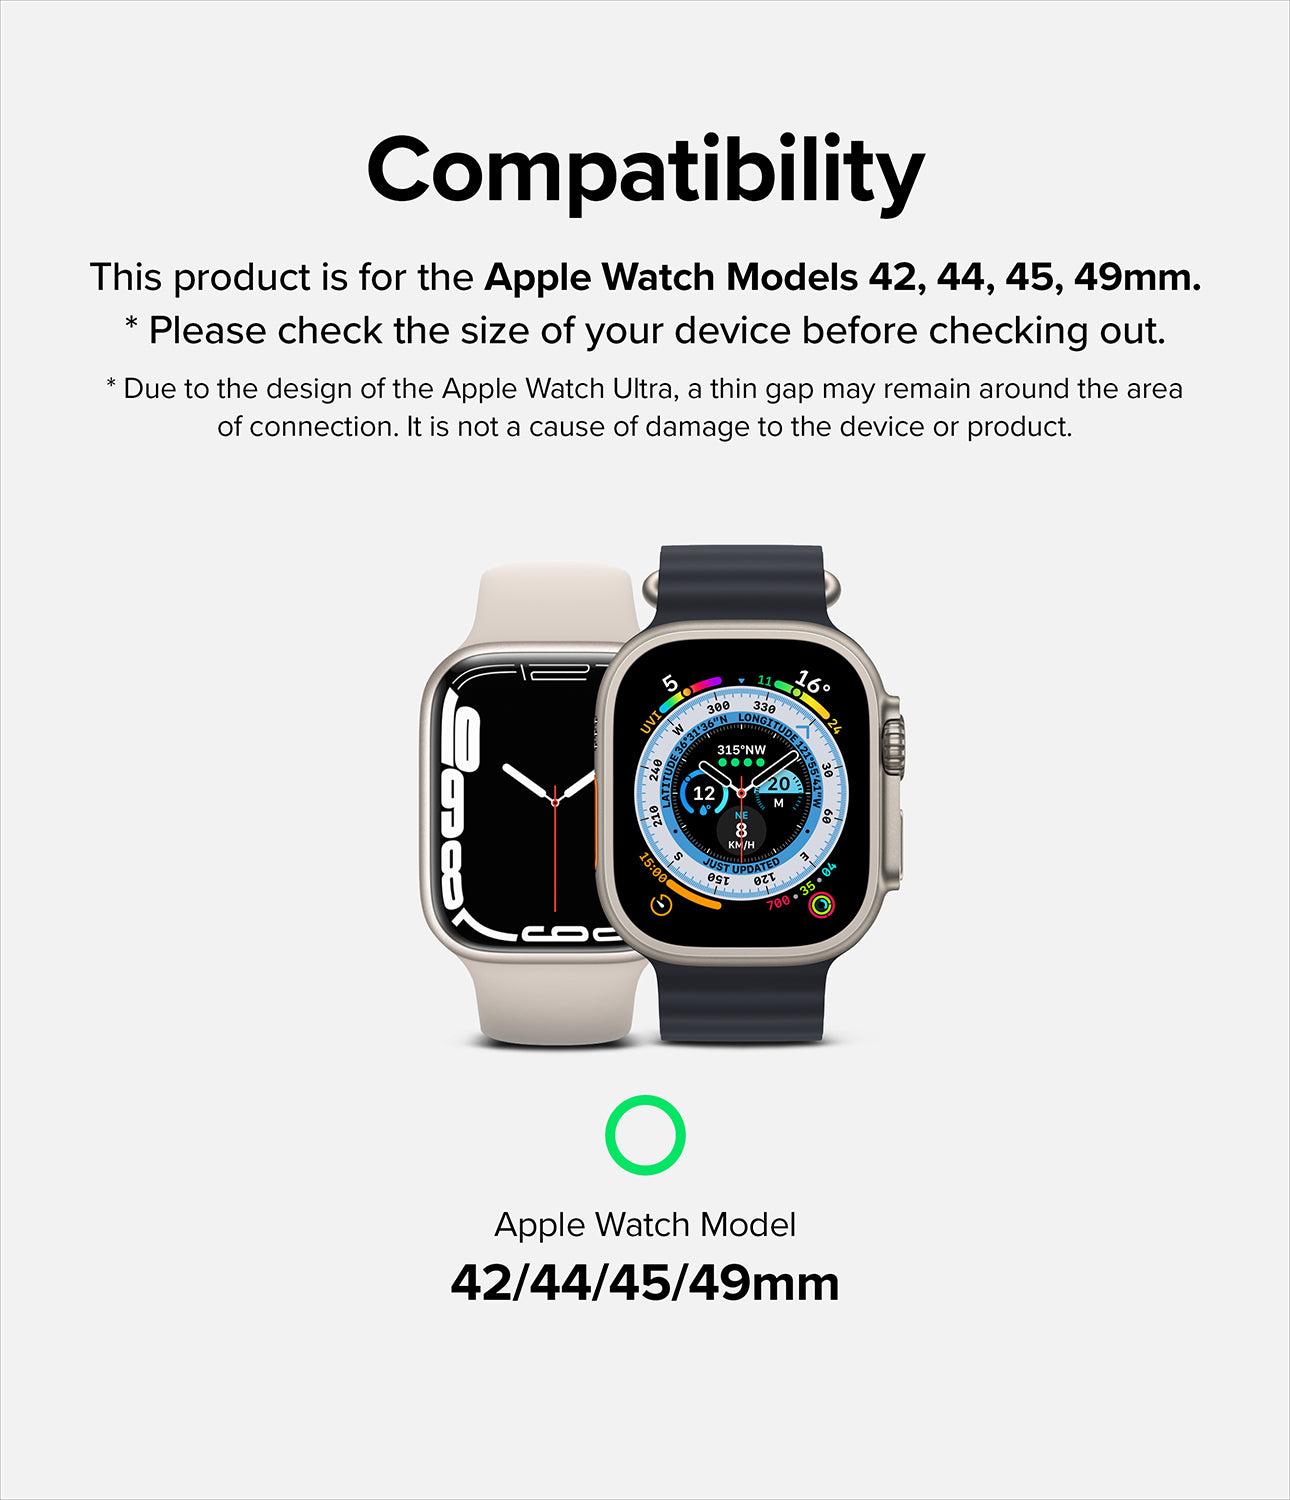 This product is for the Apple Watch Models 42, 44, 45, 49mm.